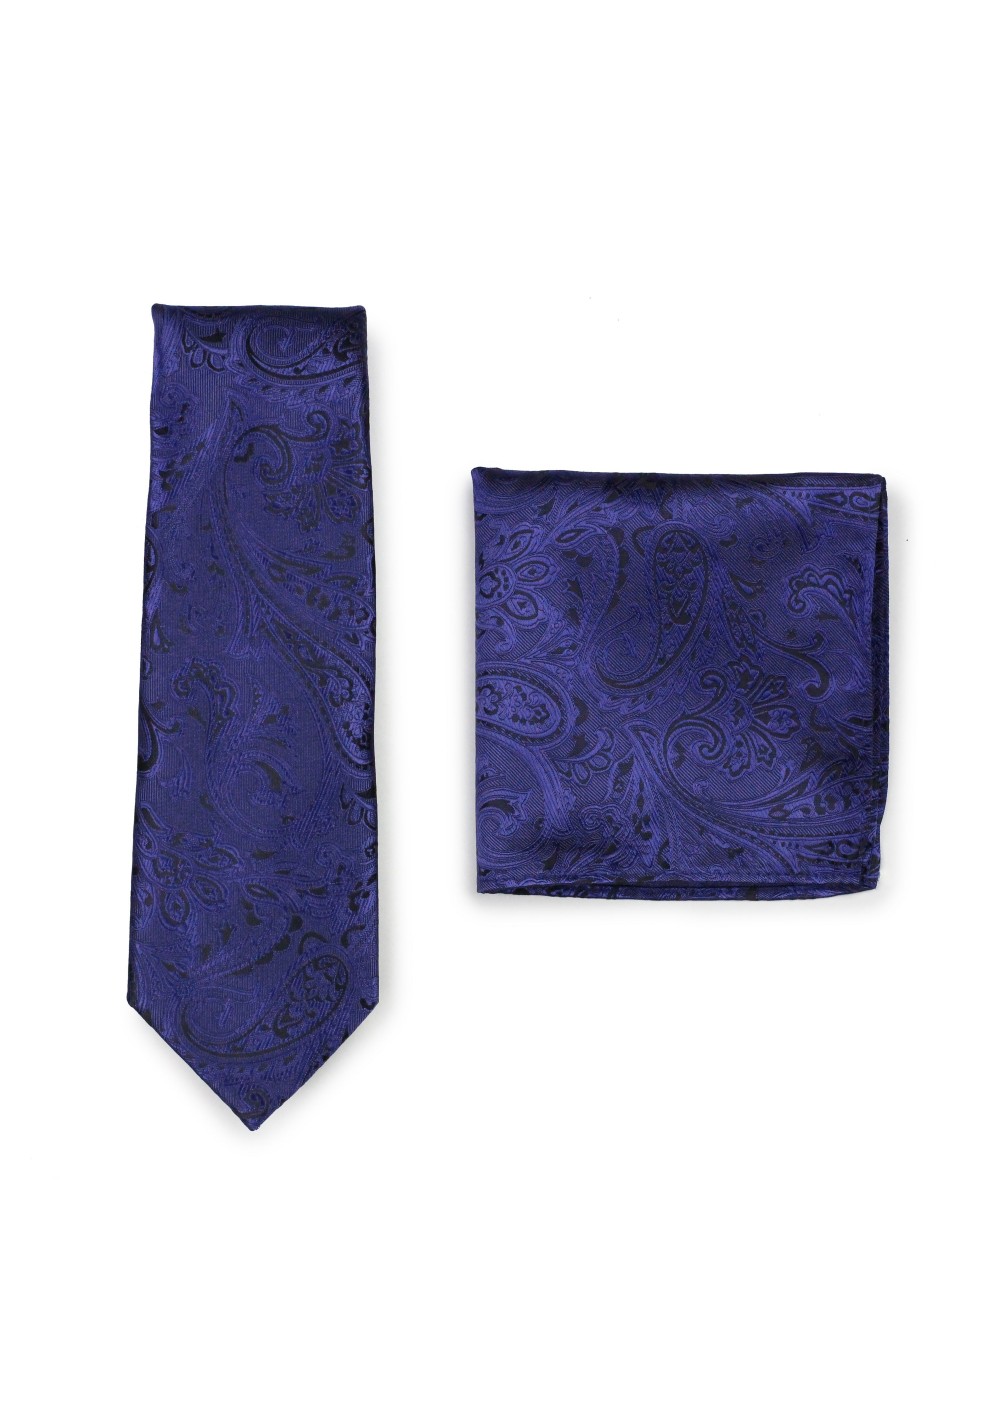 Ultramarine and Black Paisley Tie with Pocket Square Combo Set